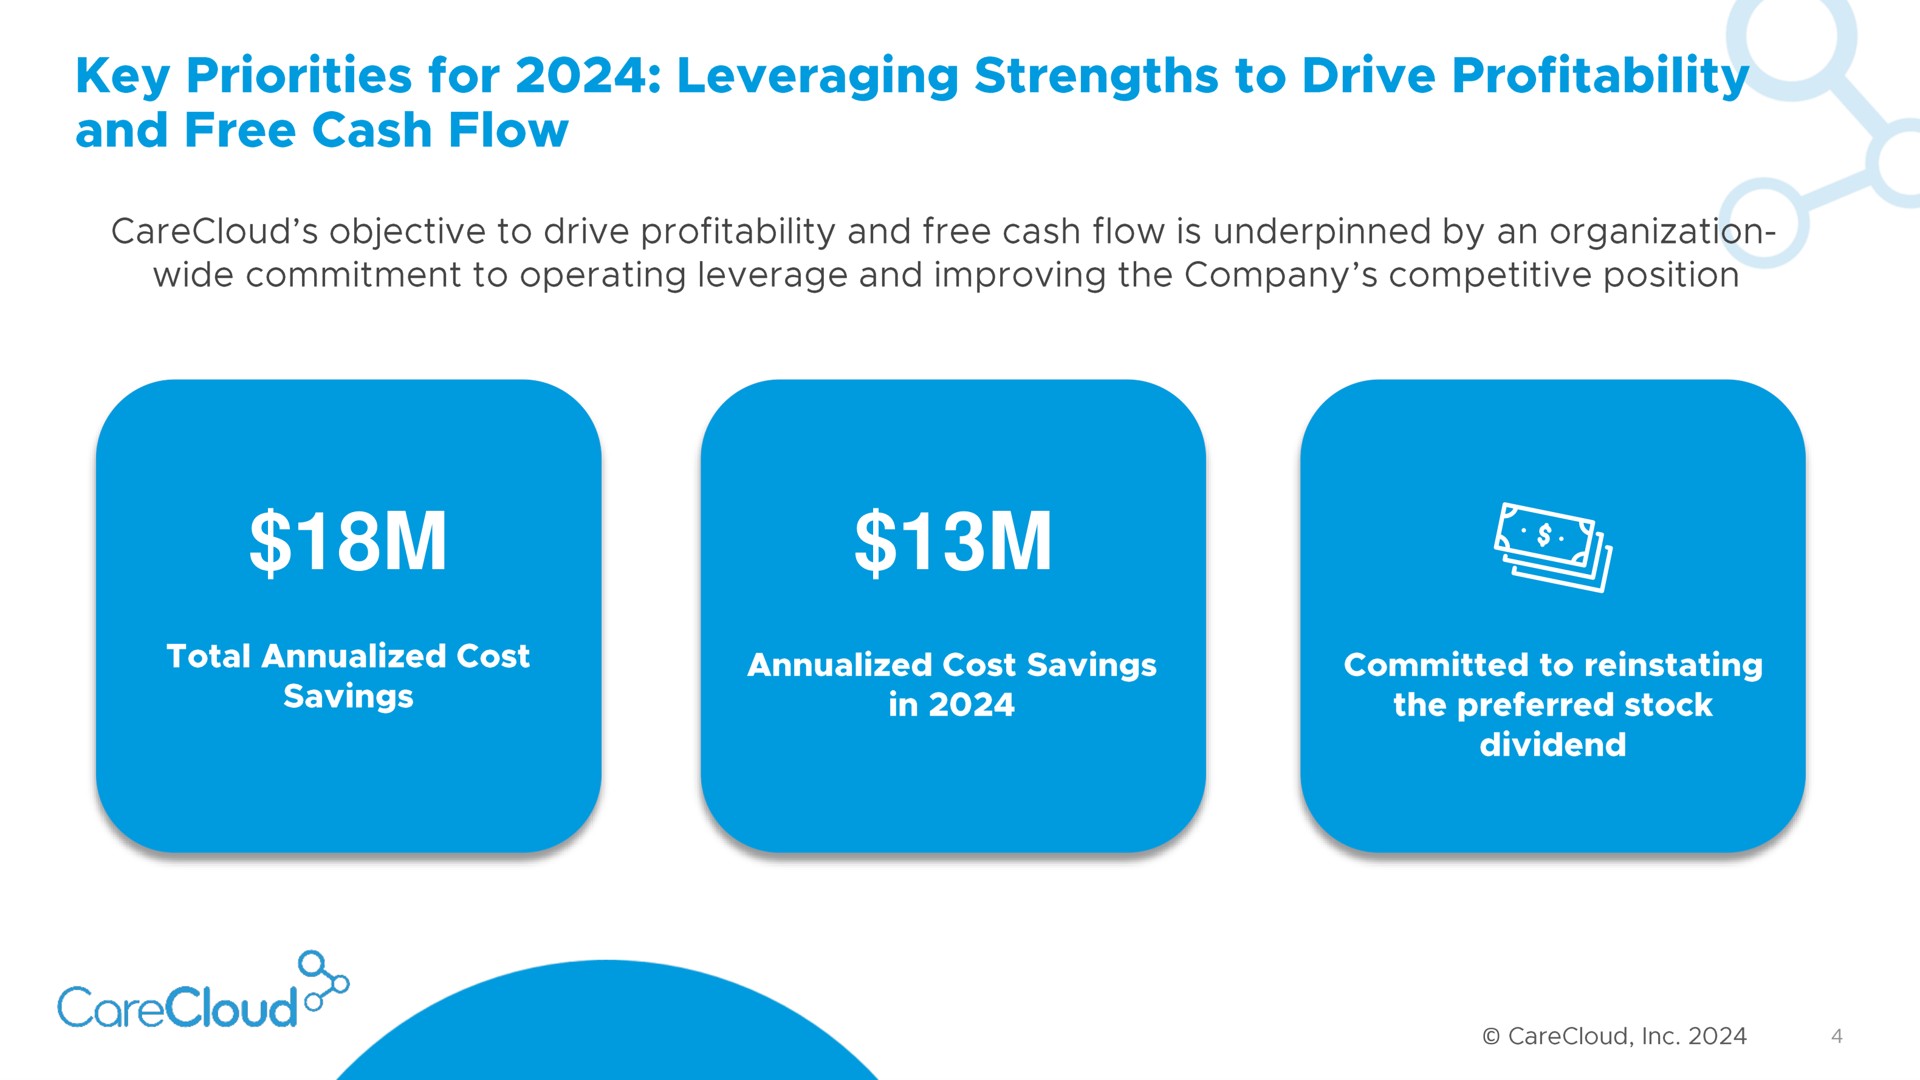 key priorities for leveraging strengths to drive profitability and free cash flow | CareCloud